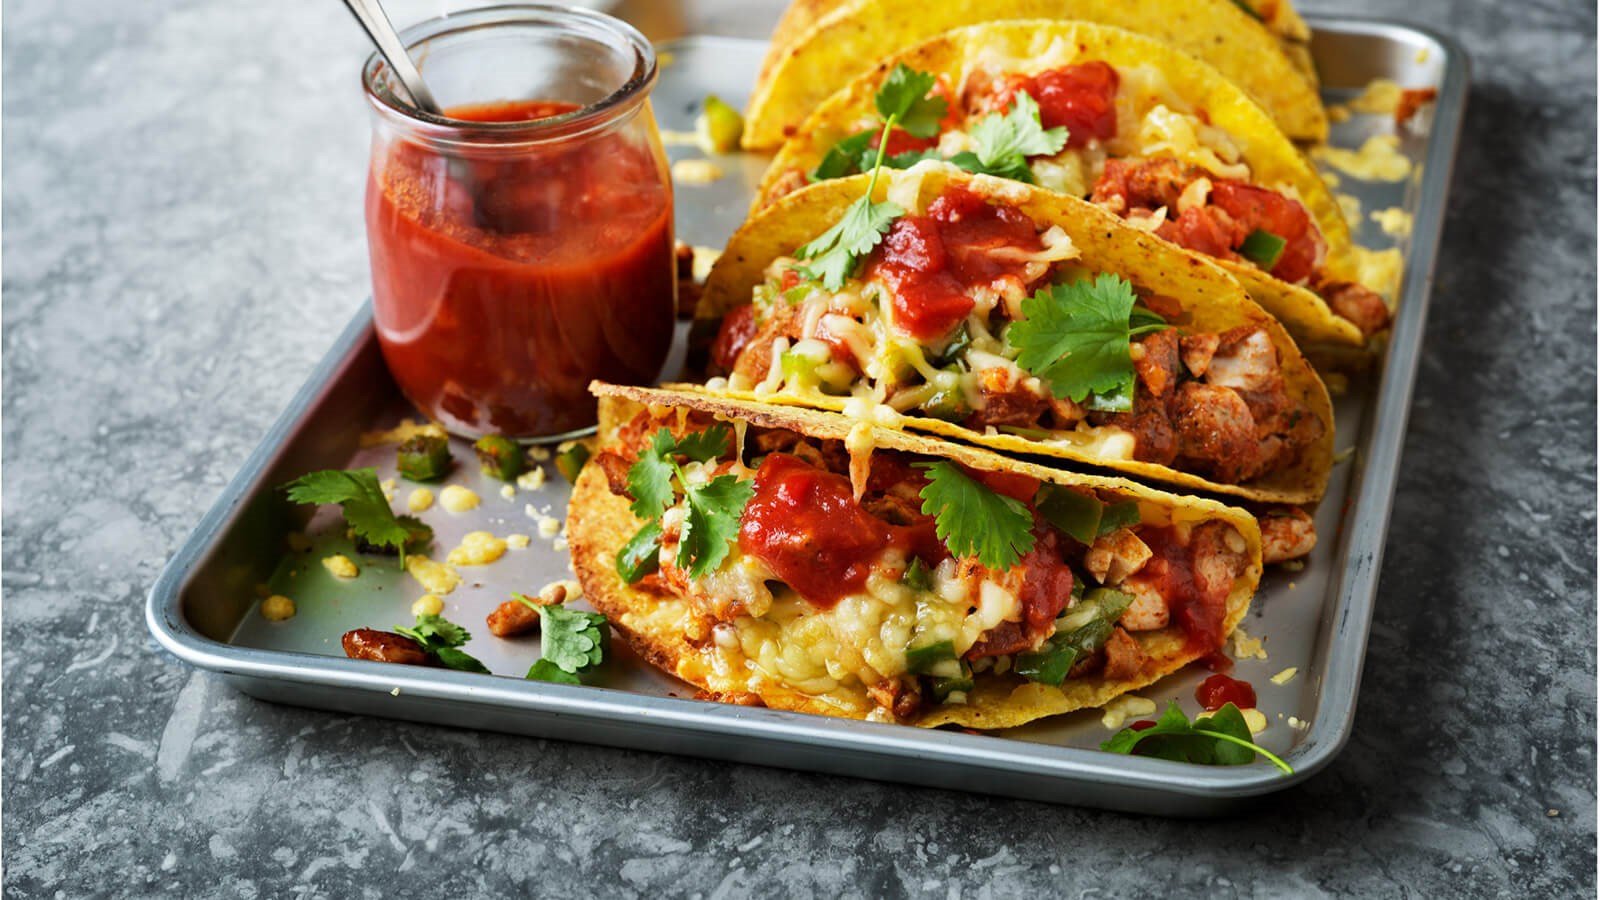 Gratinated tacos on a tray